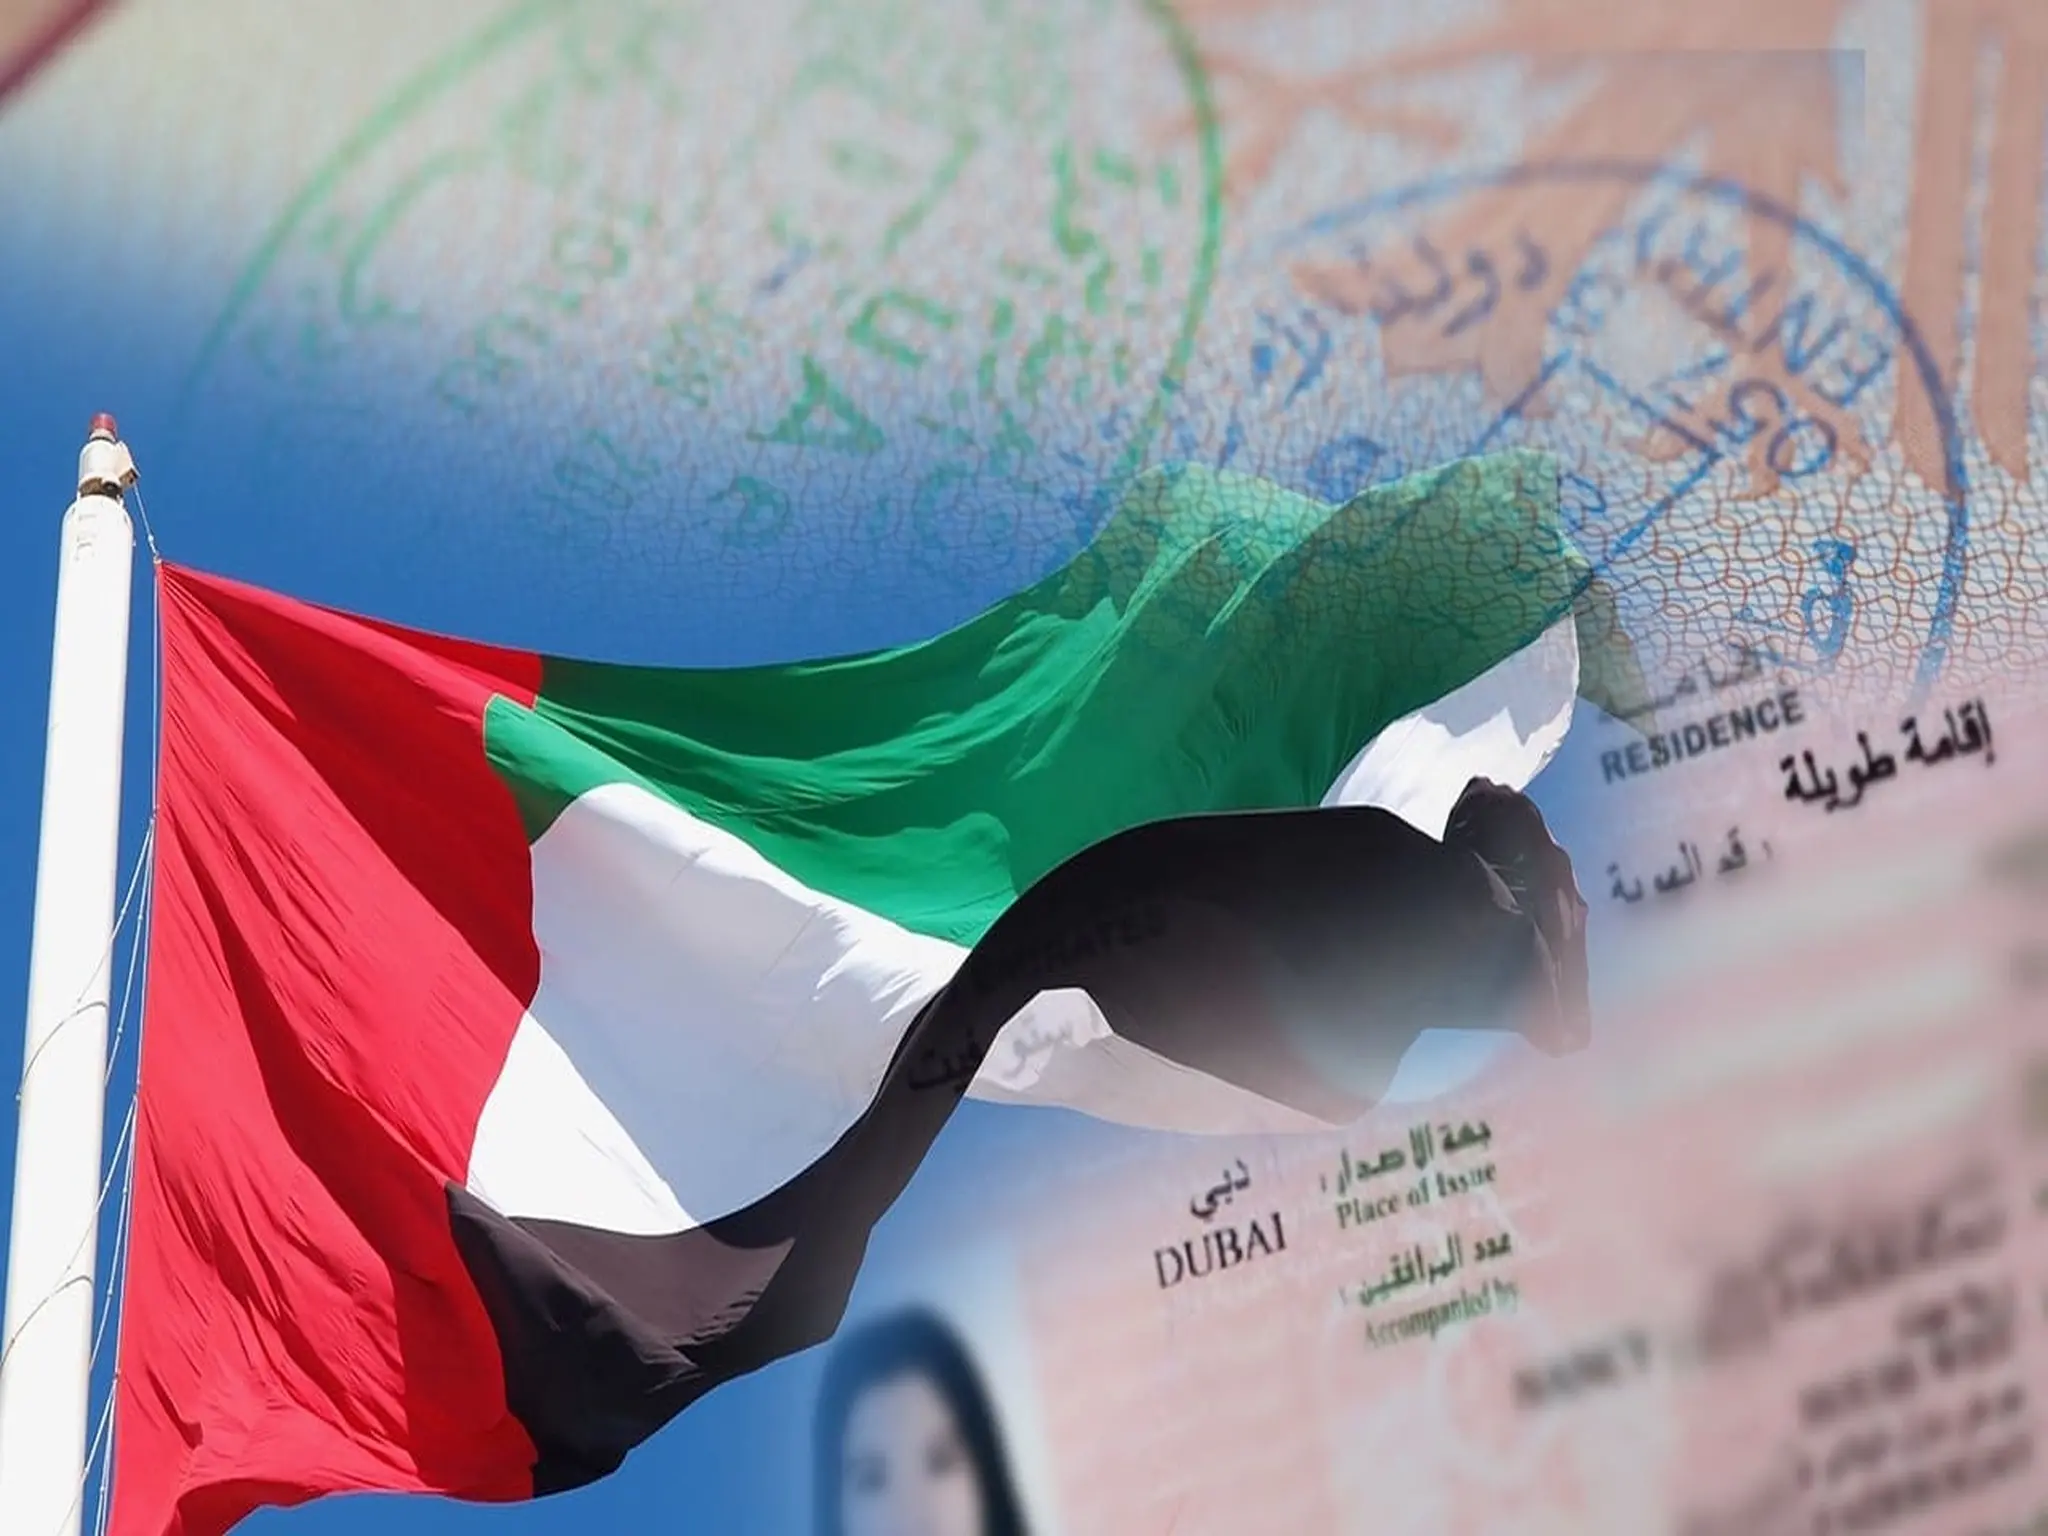 The authorities determine the cost of obtaining a multiple-entry UAE visa for five years